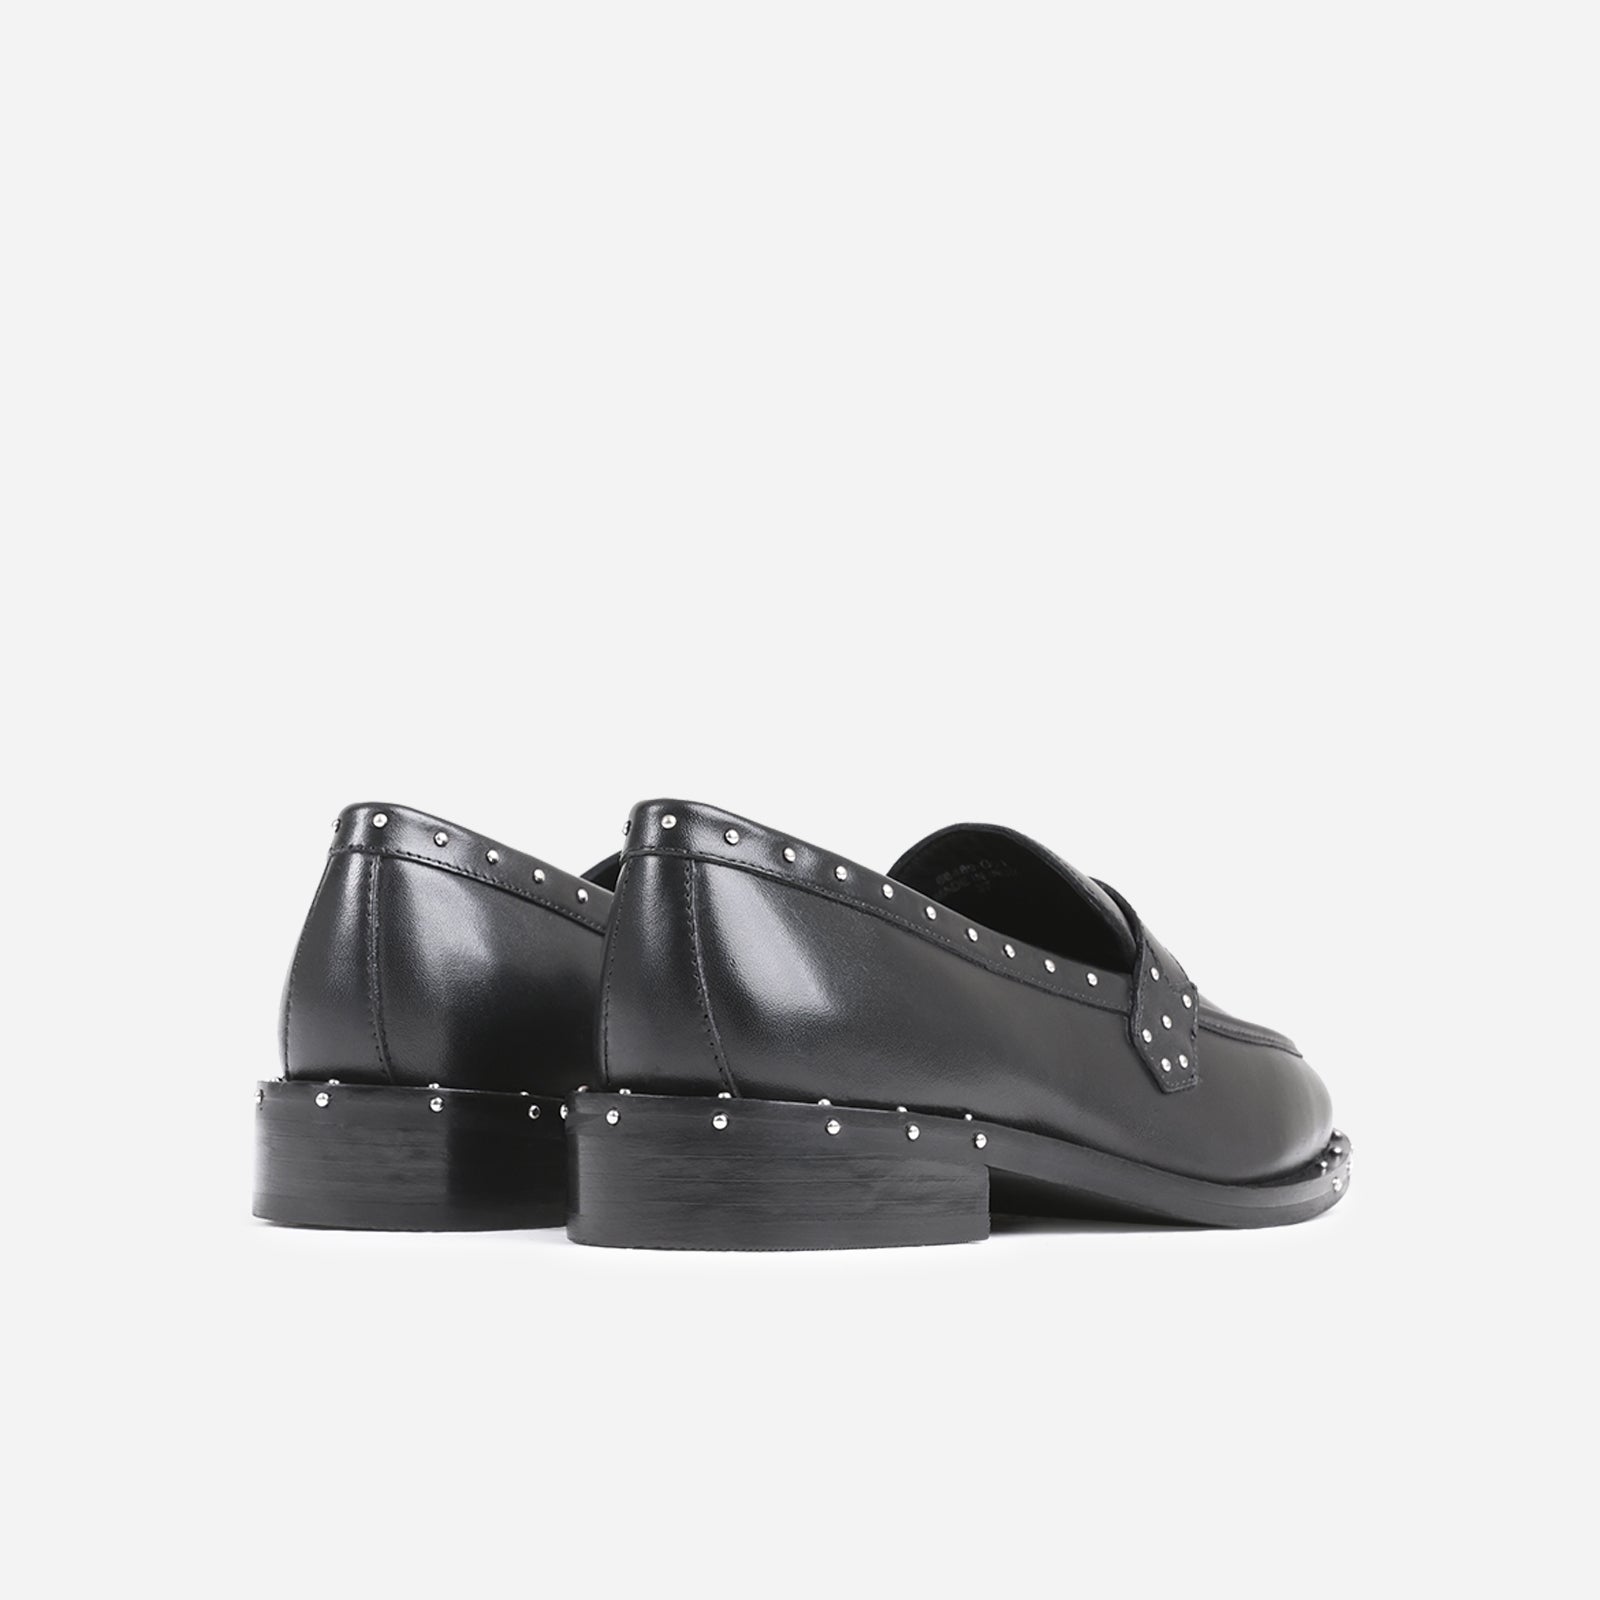 Next Wagon loafers